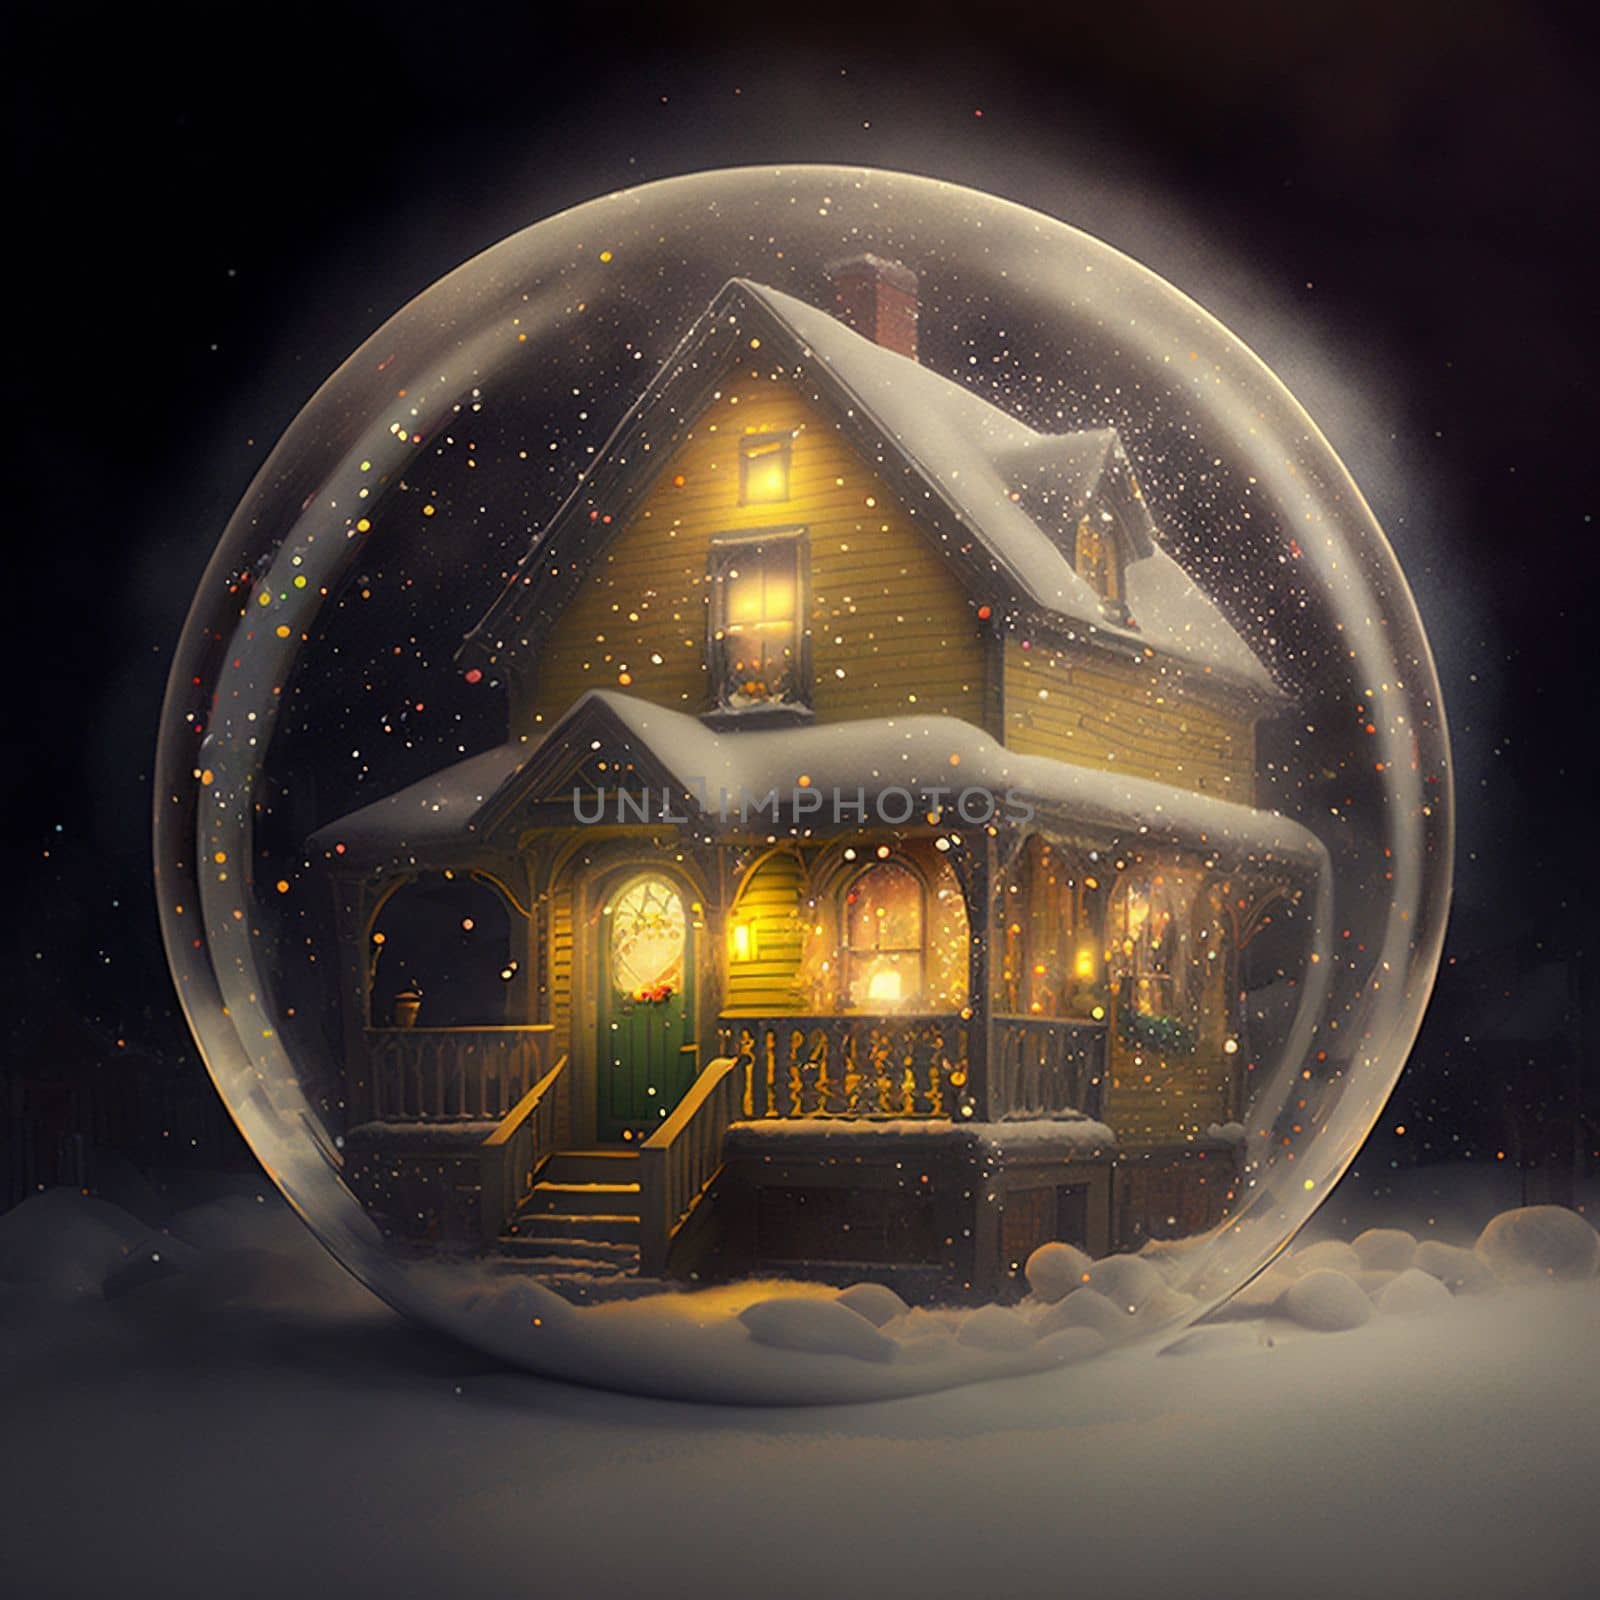 a small house with glowing windows in a glass ball, a New Year's exposition, a toy. High quality illustration